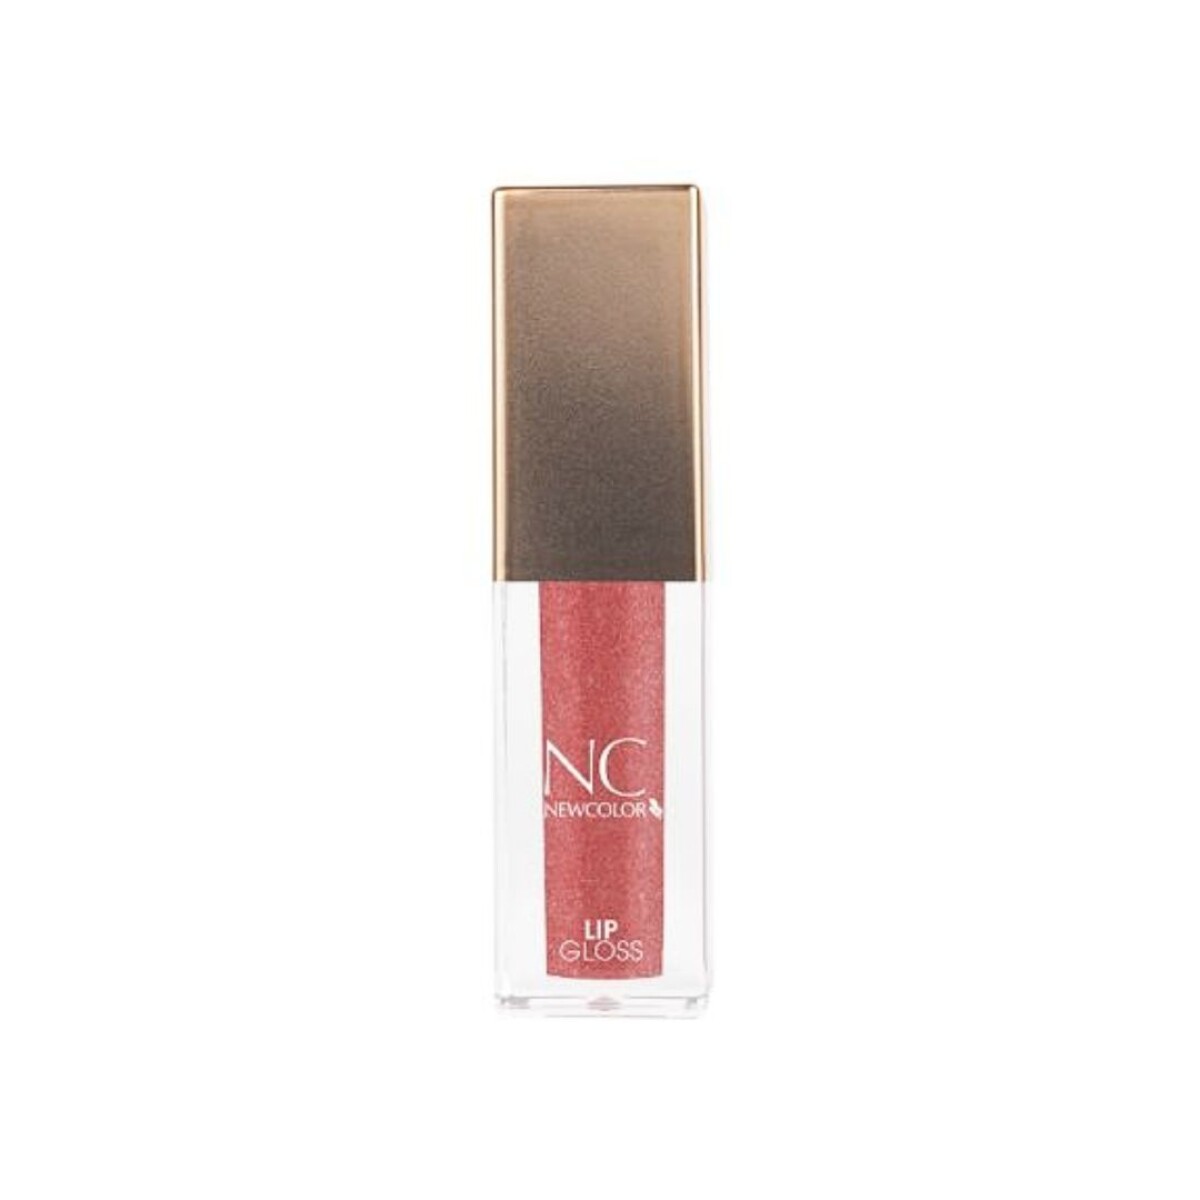 Labial Gloss New Color - Blossom N° 24 